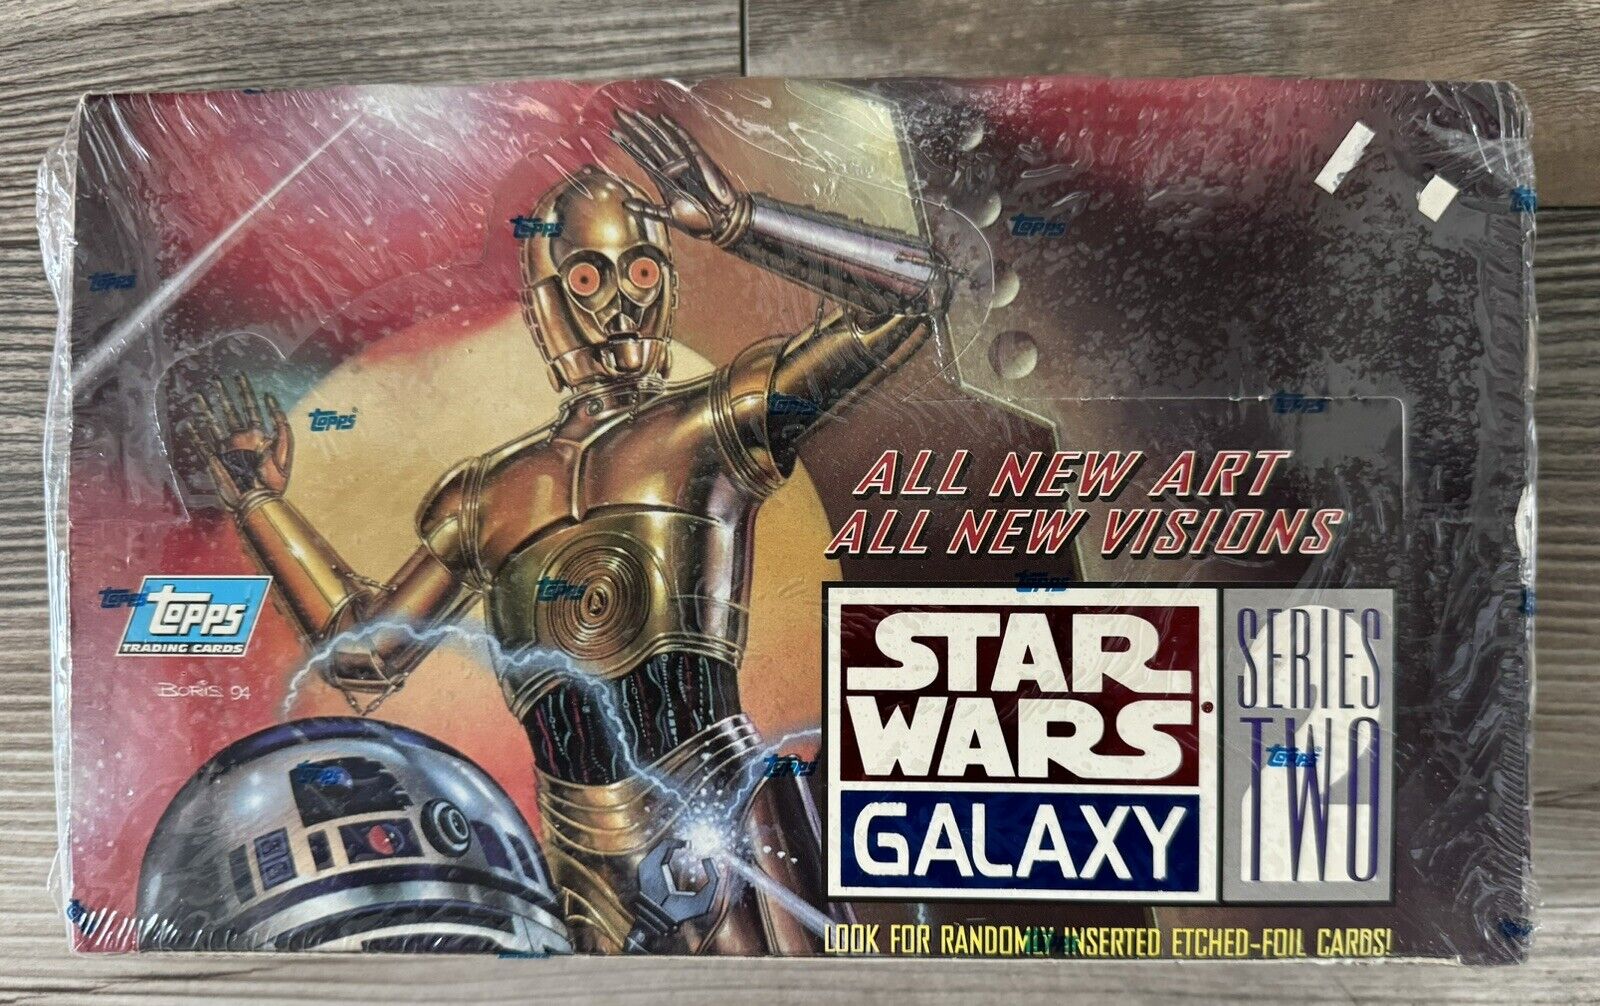 1994 Star Wars Galaxy Topps Trading Card Series 2 Foil Cards BRAND NEW SEALED